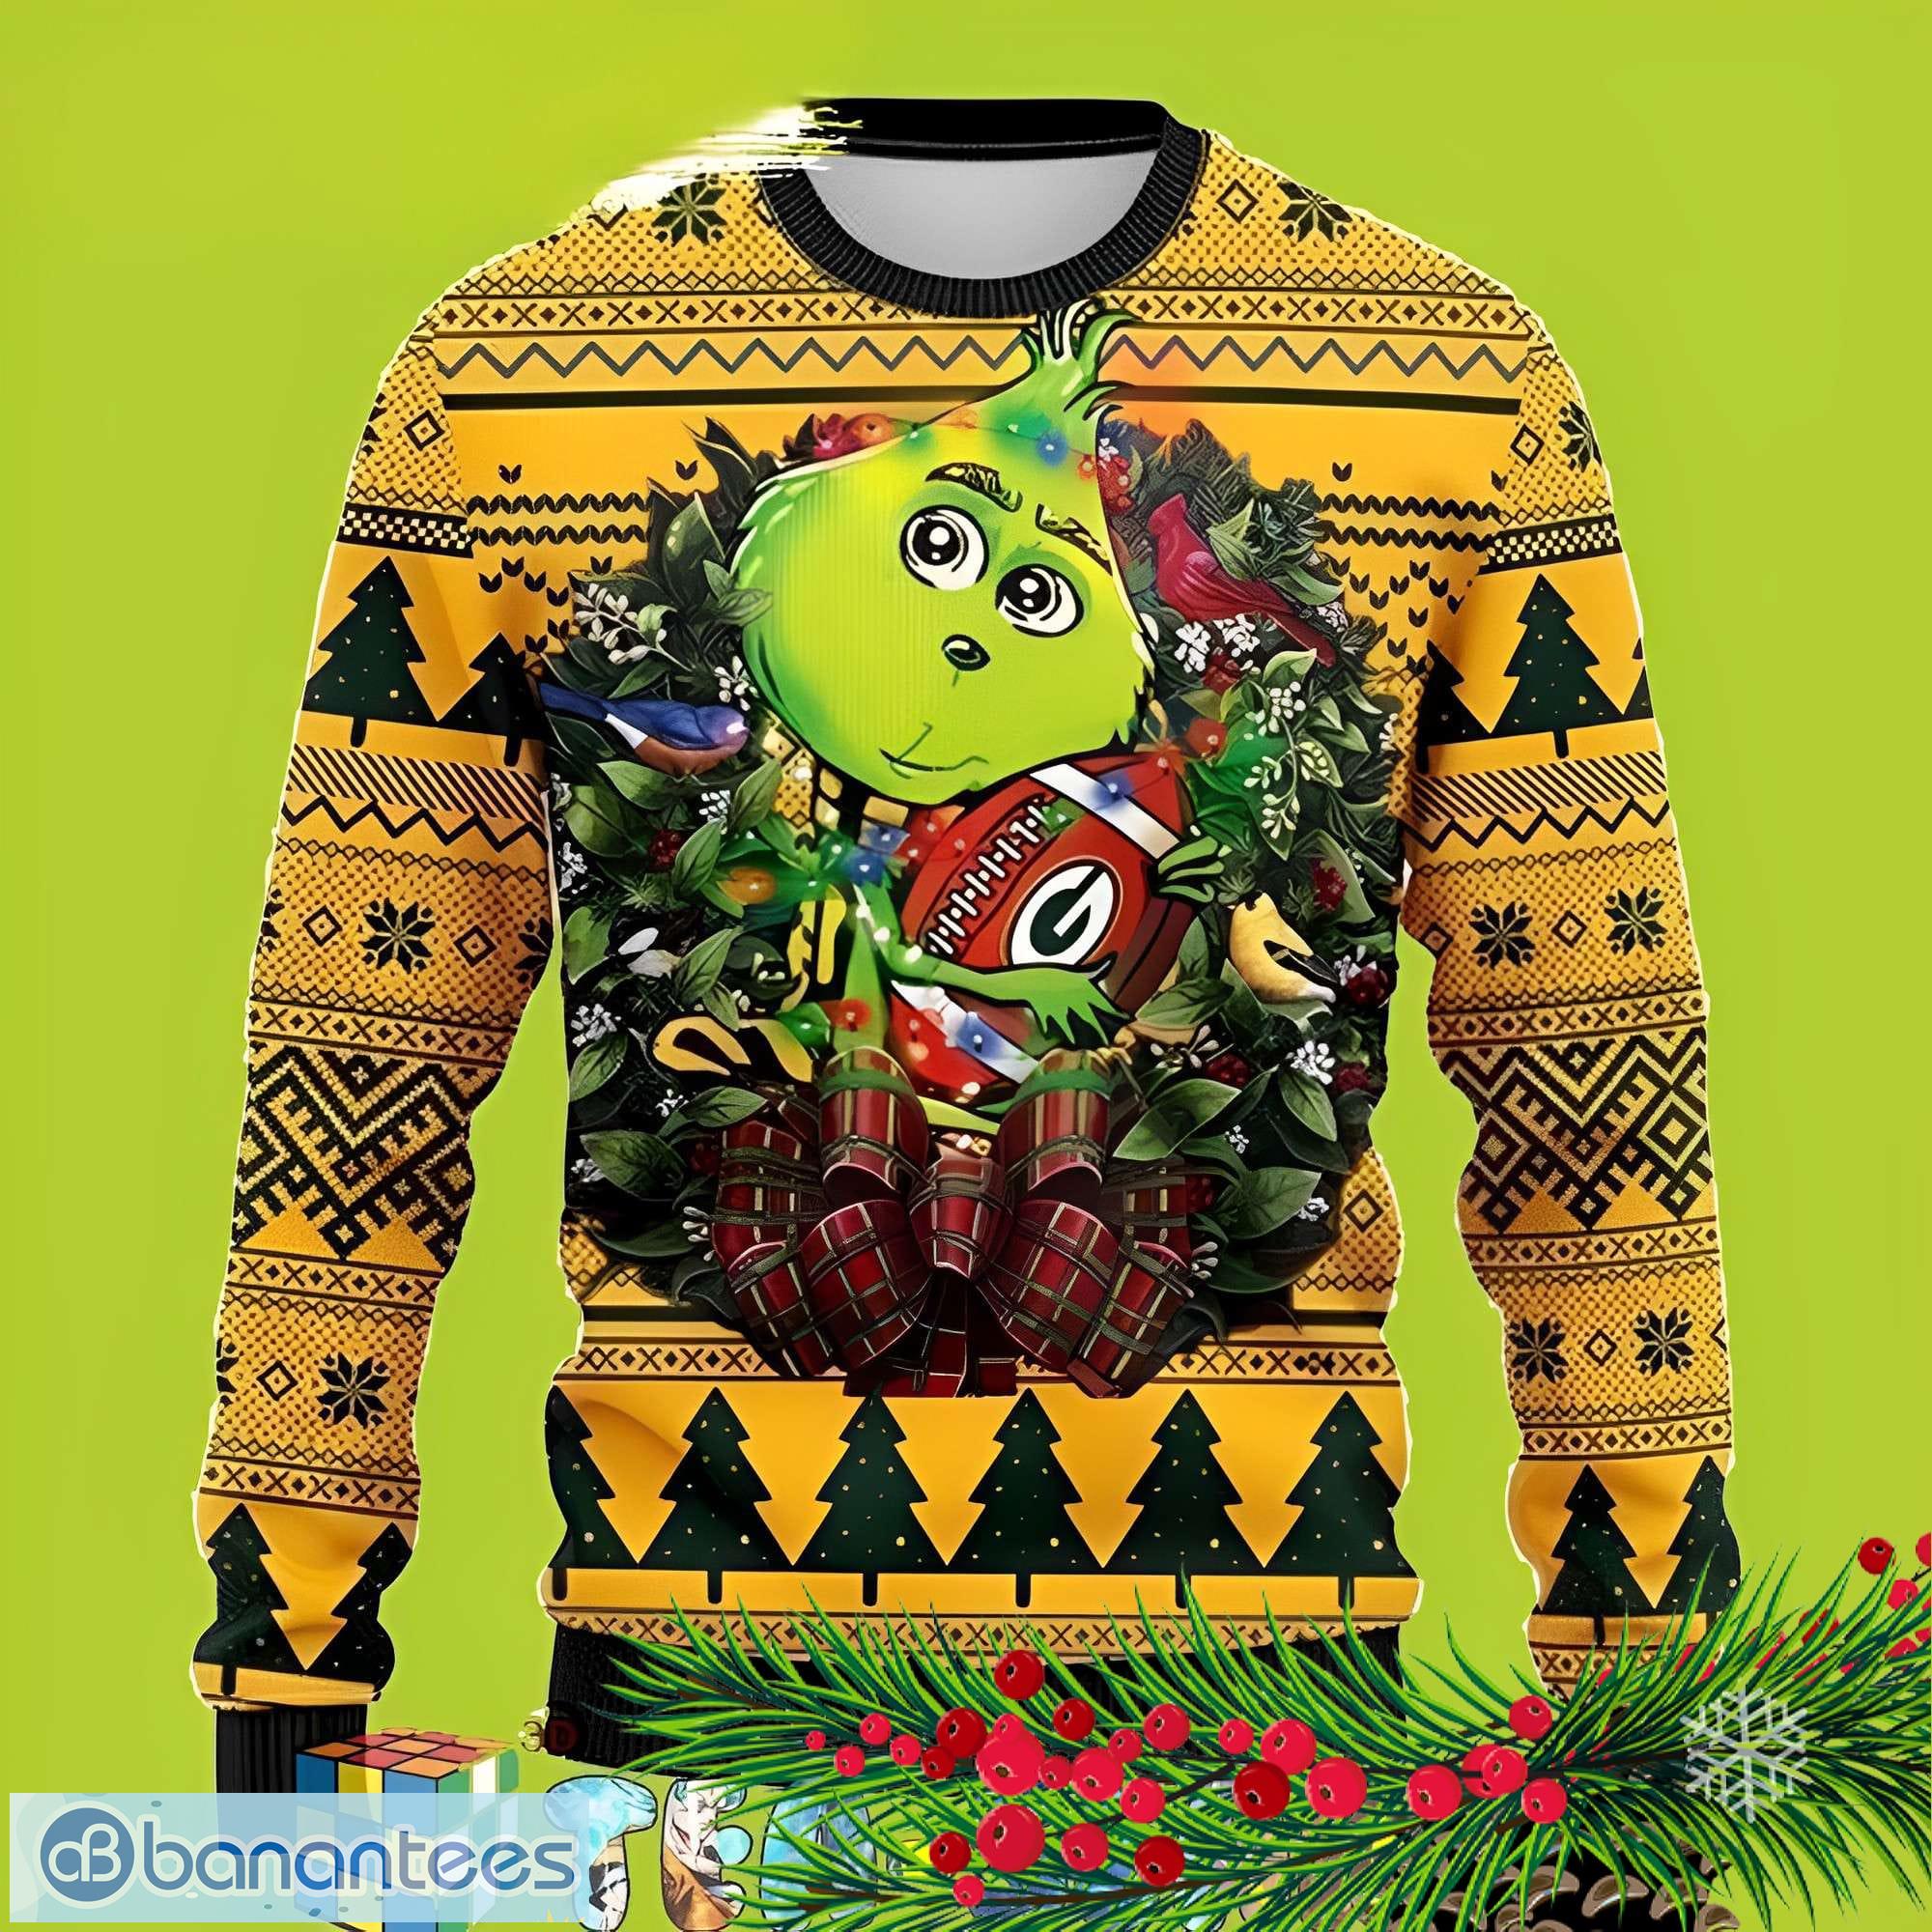 NFL Green Bay Packer Cute Grinch Funny Xmas s, Grinch Party Ugly Christmas Sweater - NFL Green Bay Packer Cute Grinch Funny Xmas Sweaters, Grinch Ugly Sweater